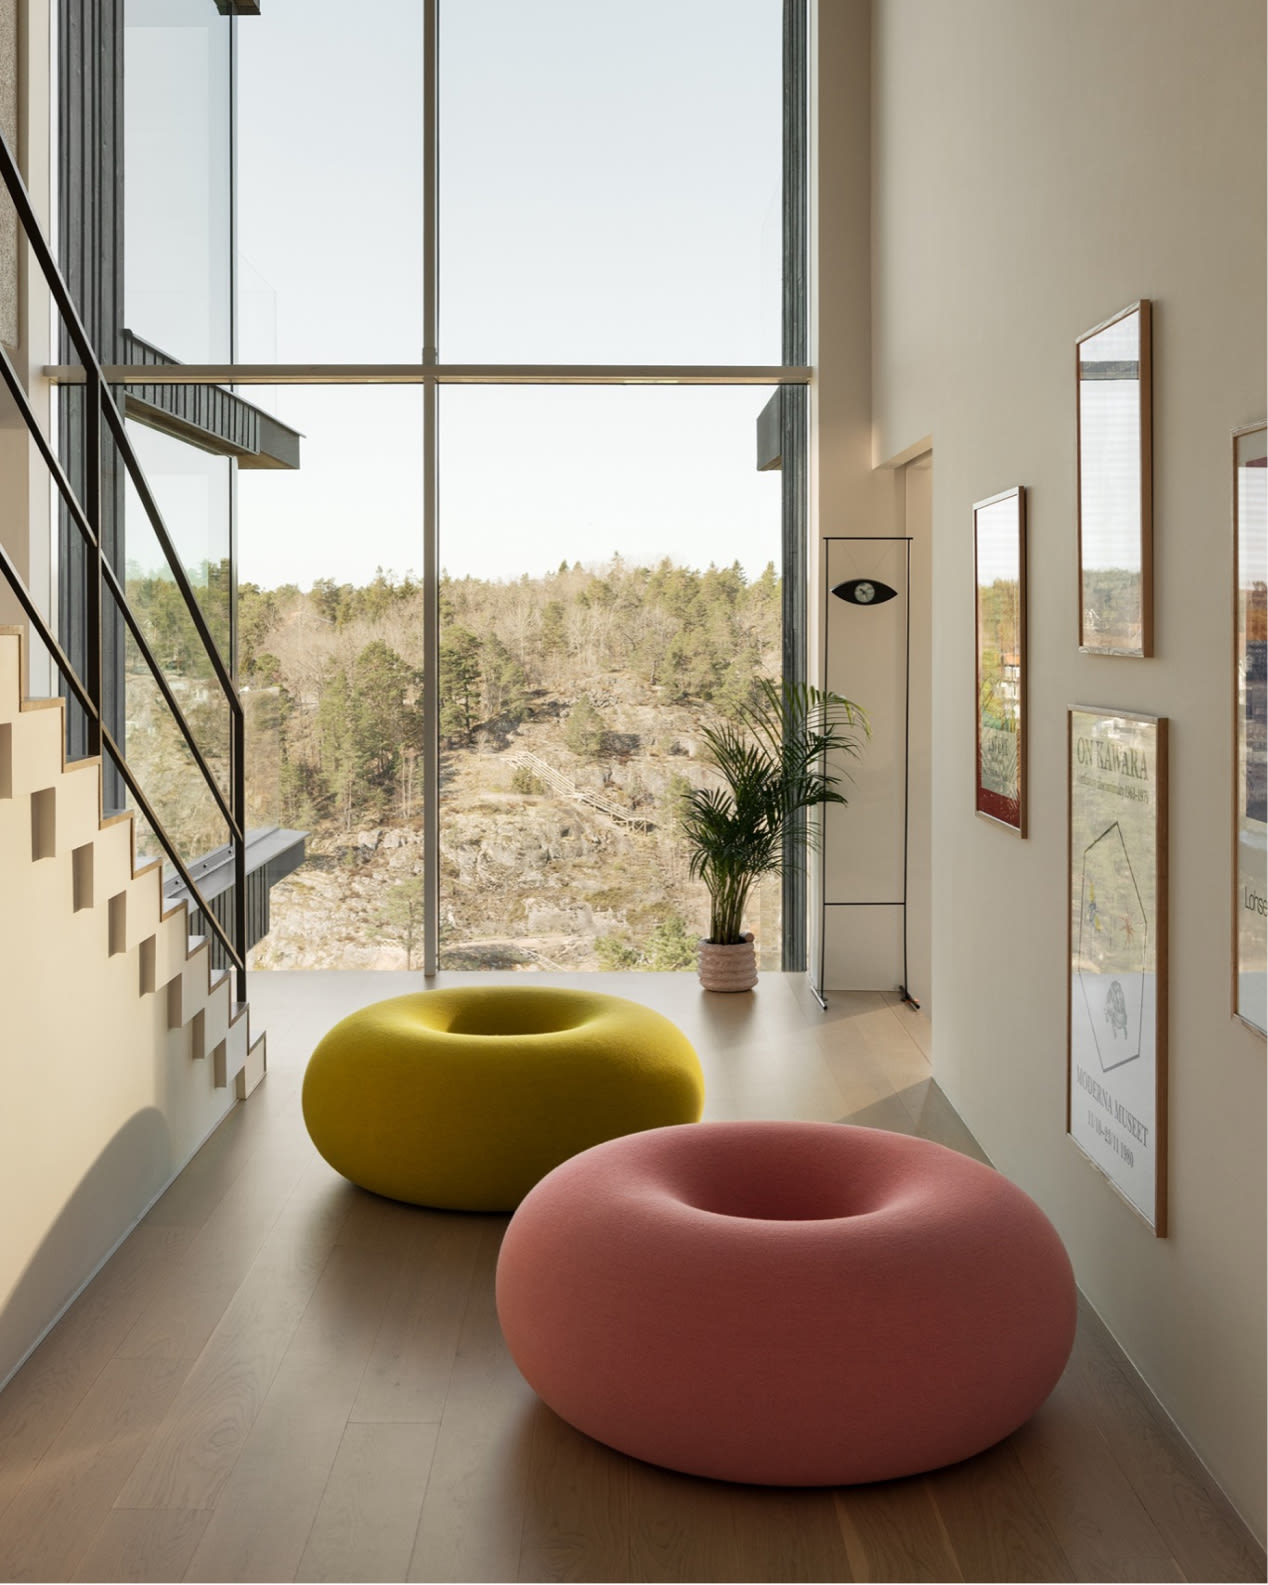 Hem - A lifestyle image of a hallway featuring two Boa Poufs in Sulfur Yellow and Cotton Candy.